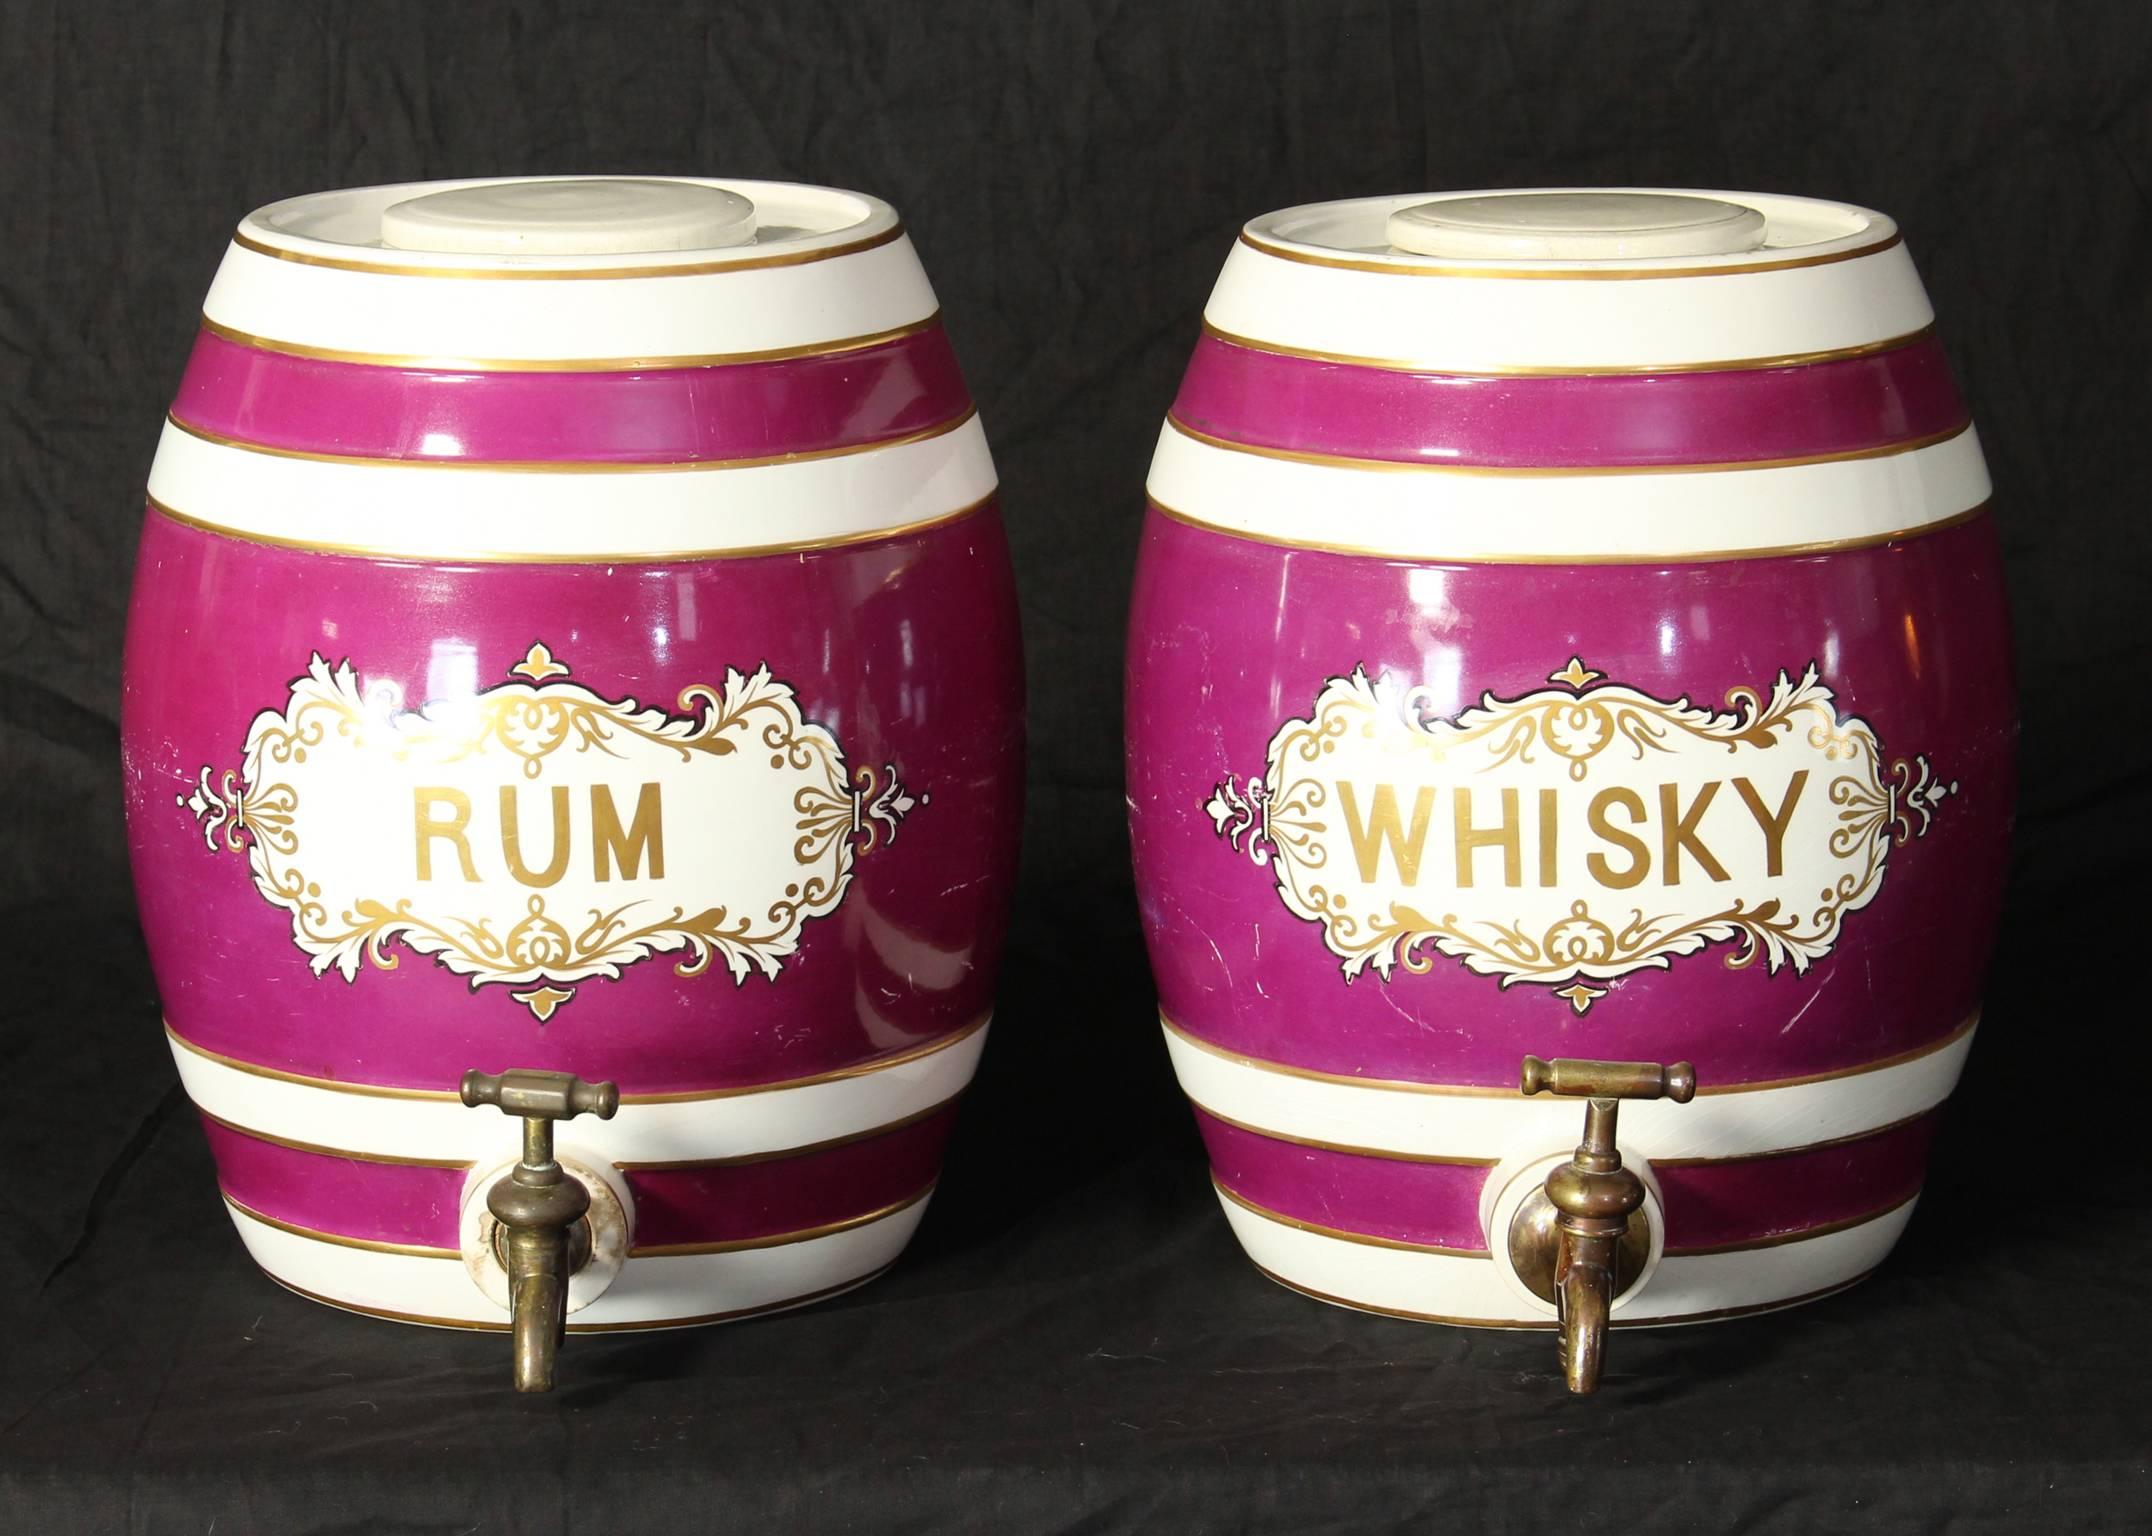 A pair of mid-19th century English spirit barrels in an unusual raspberry color with brass spigots.